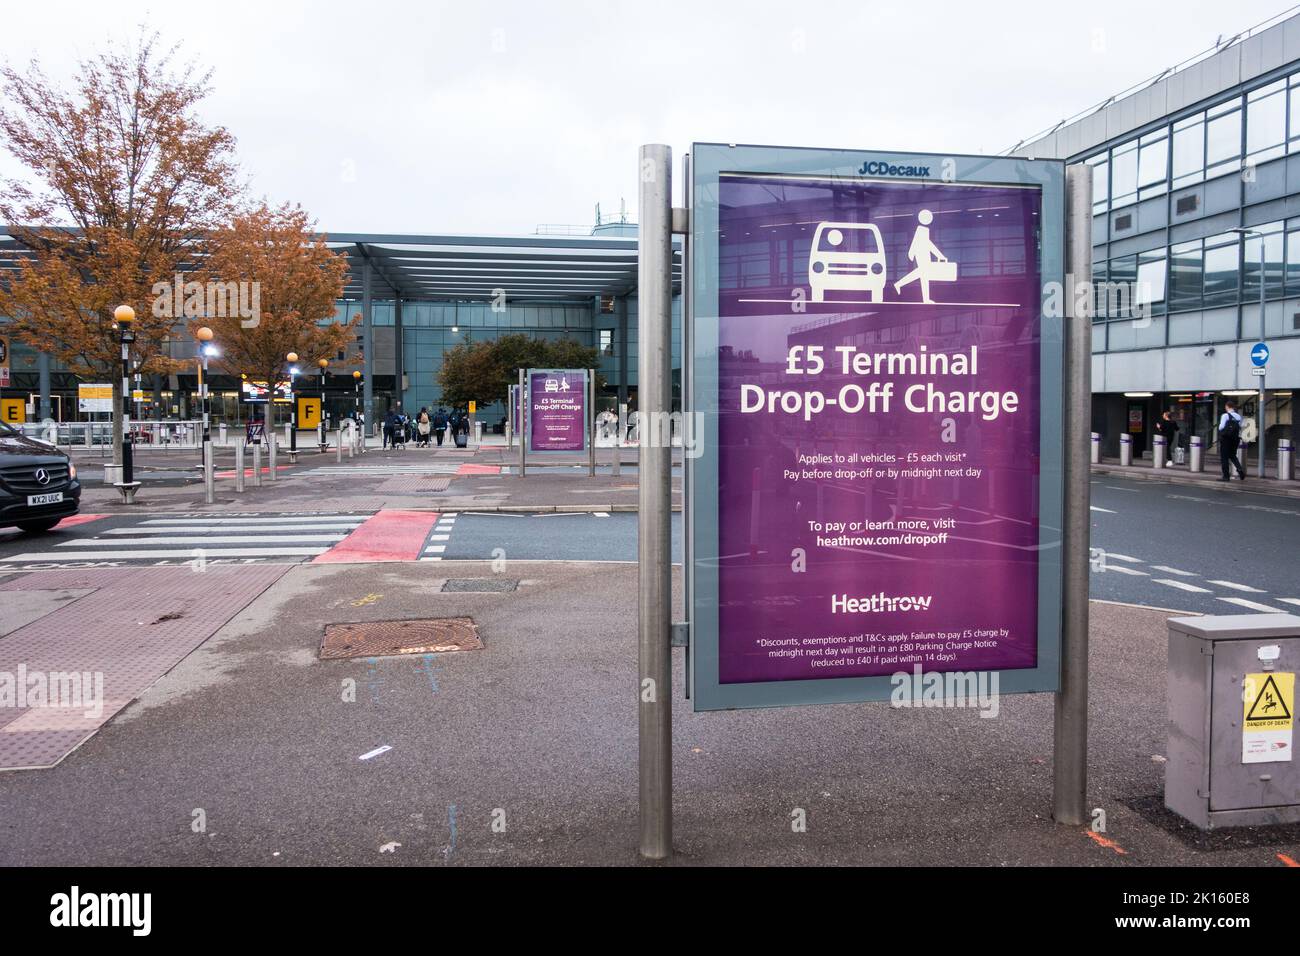 Heathrow drop off charge poster Stock Photo